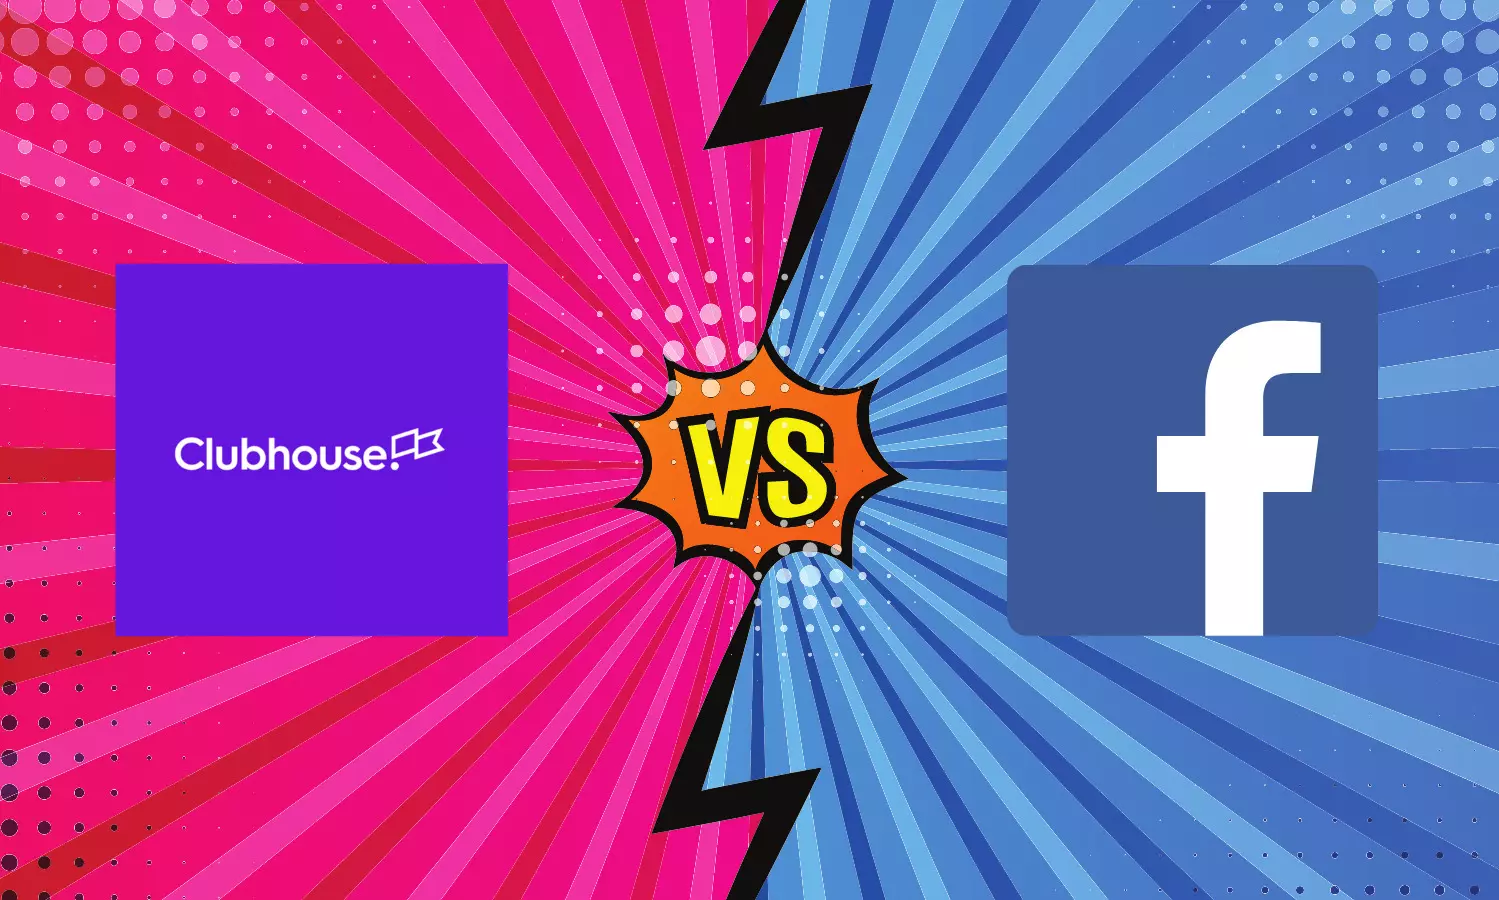 Clubhouse working on private messaging feature to take on Facebooks Live Audio Room